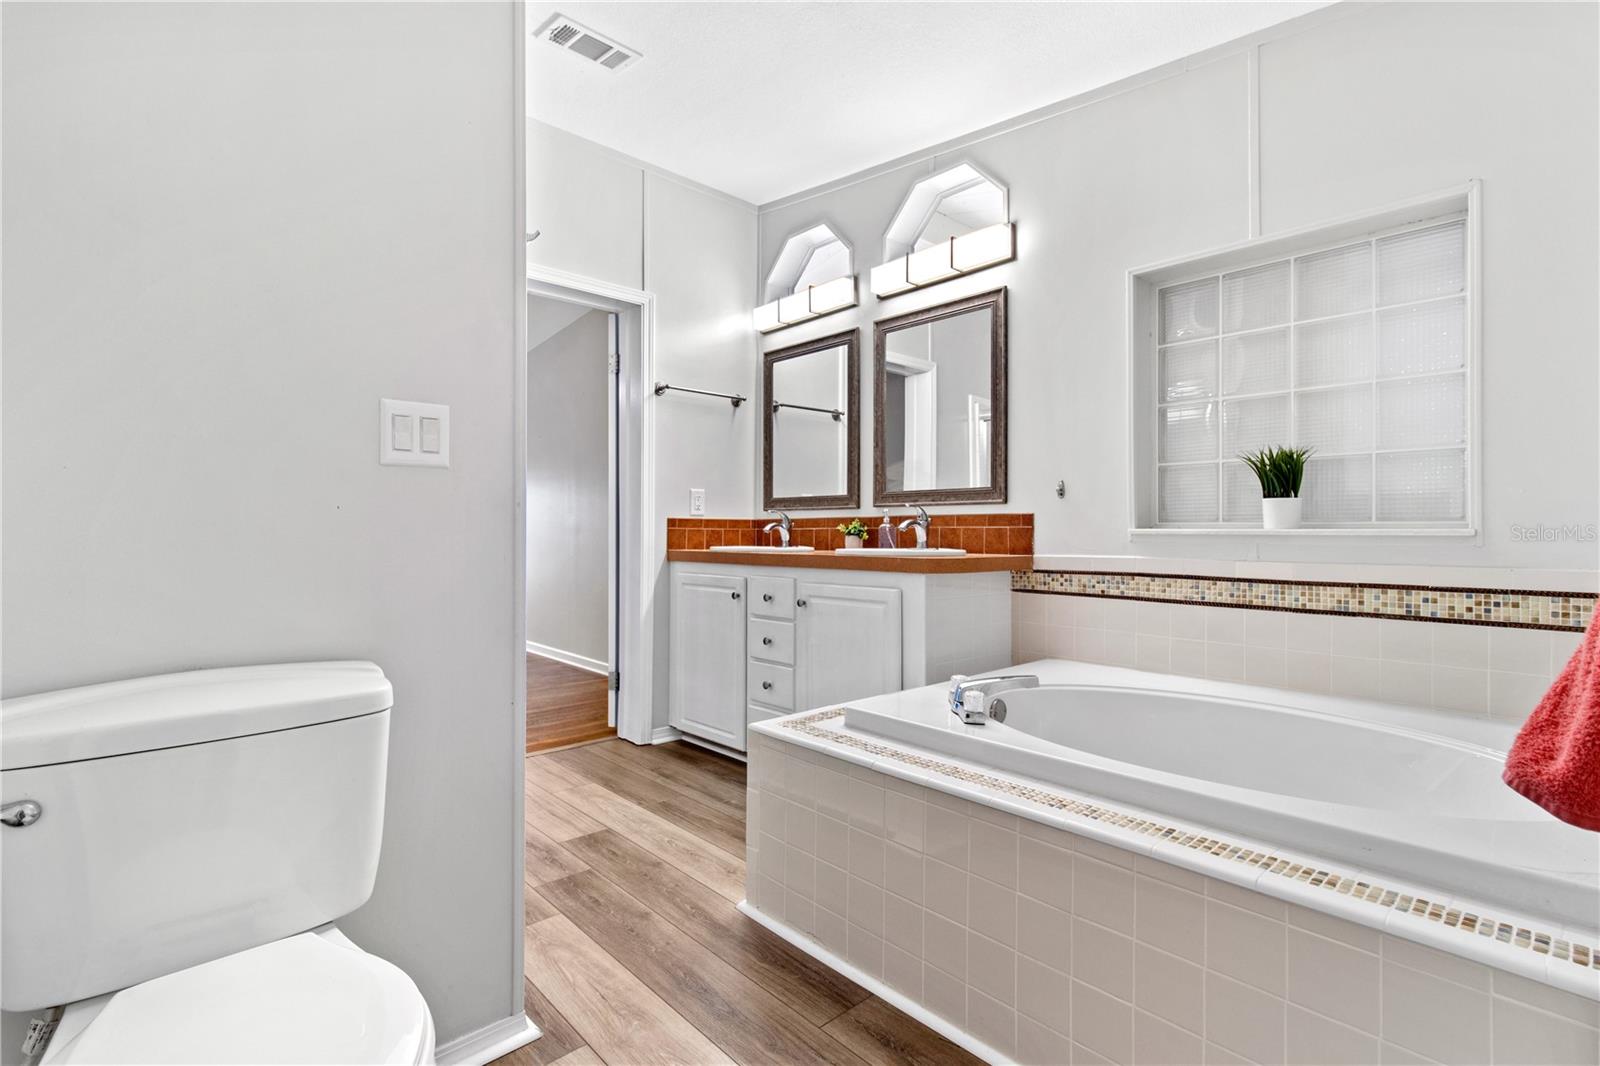 Primary bathroom with large soaking tub.